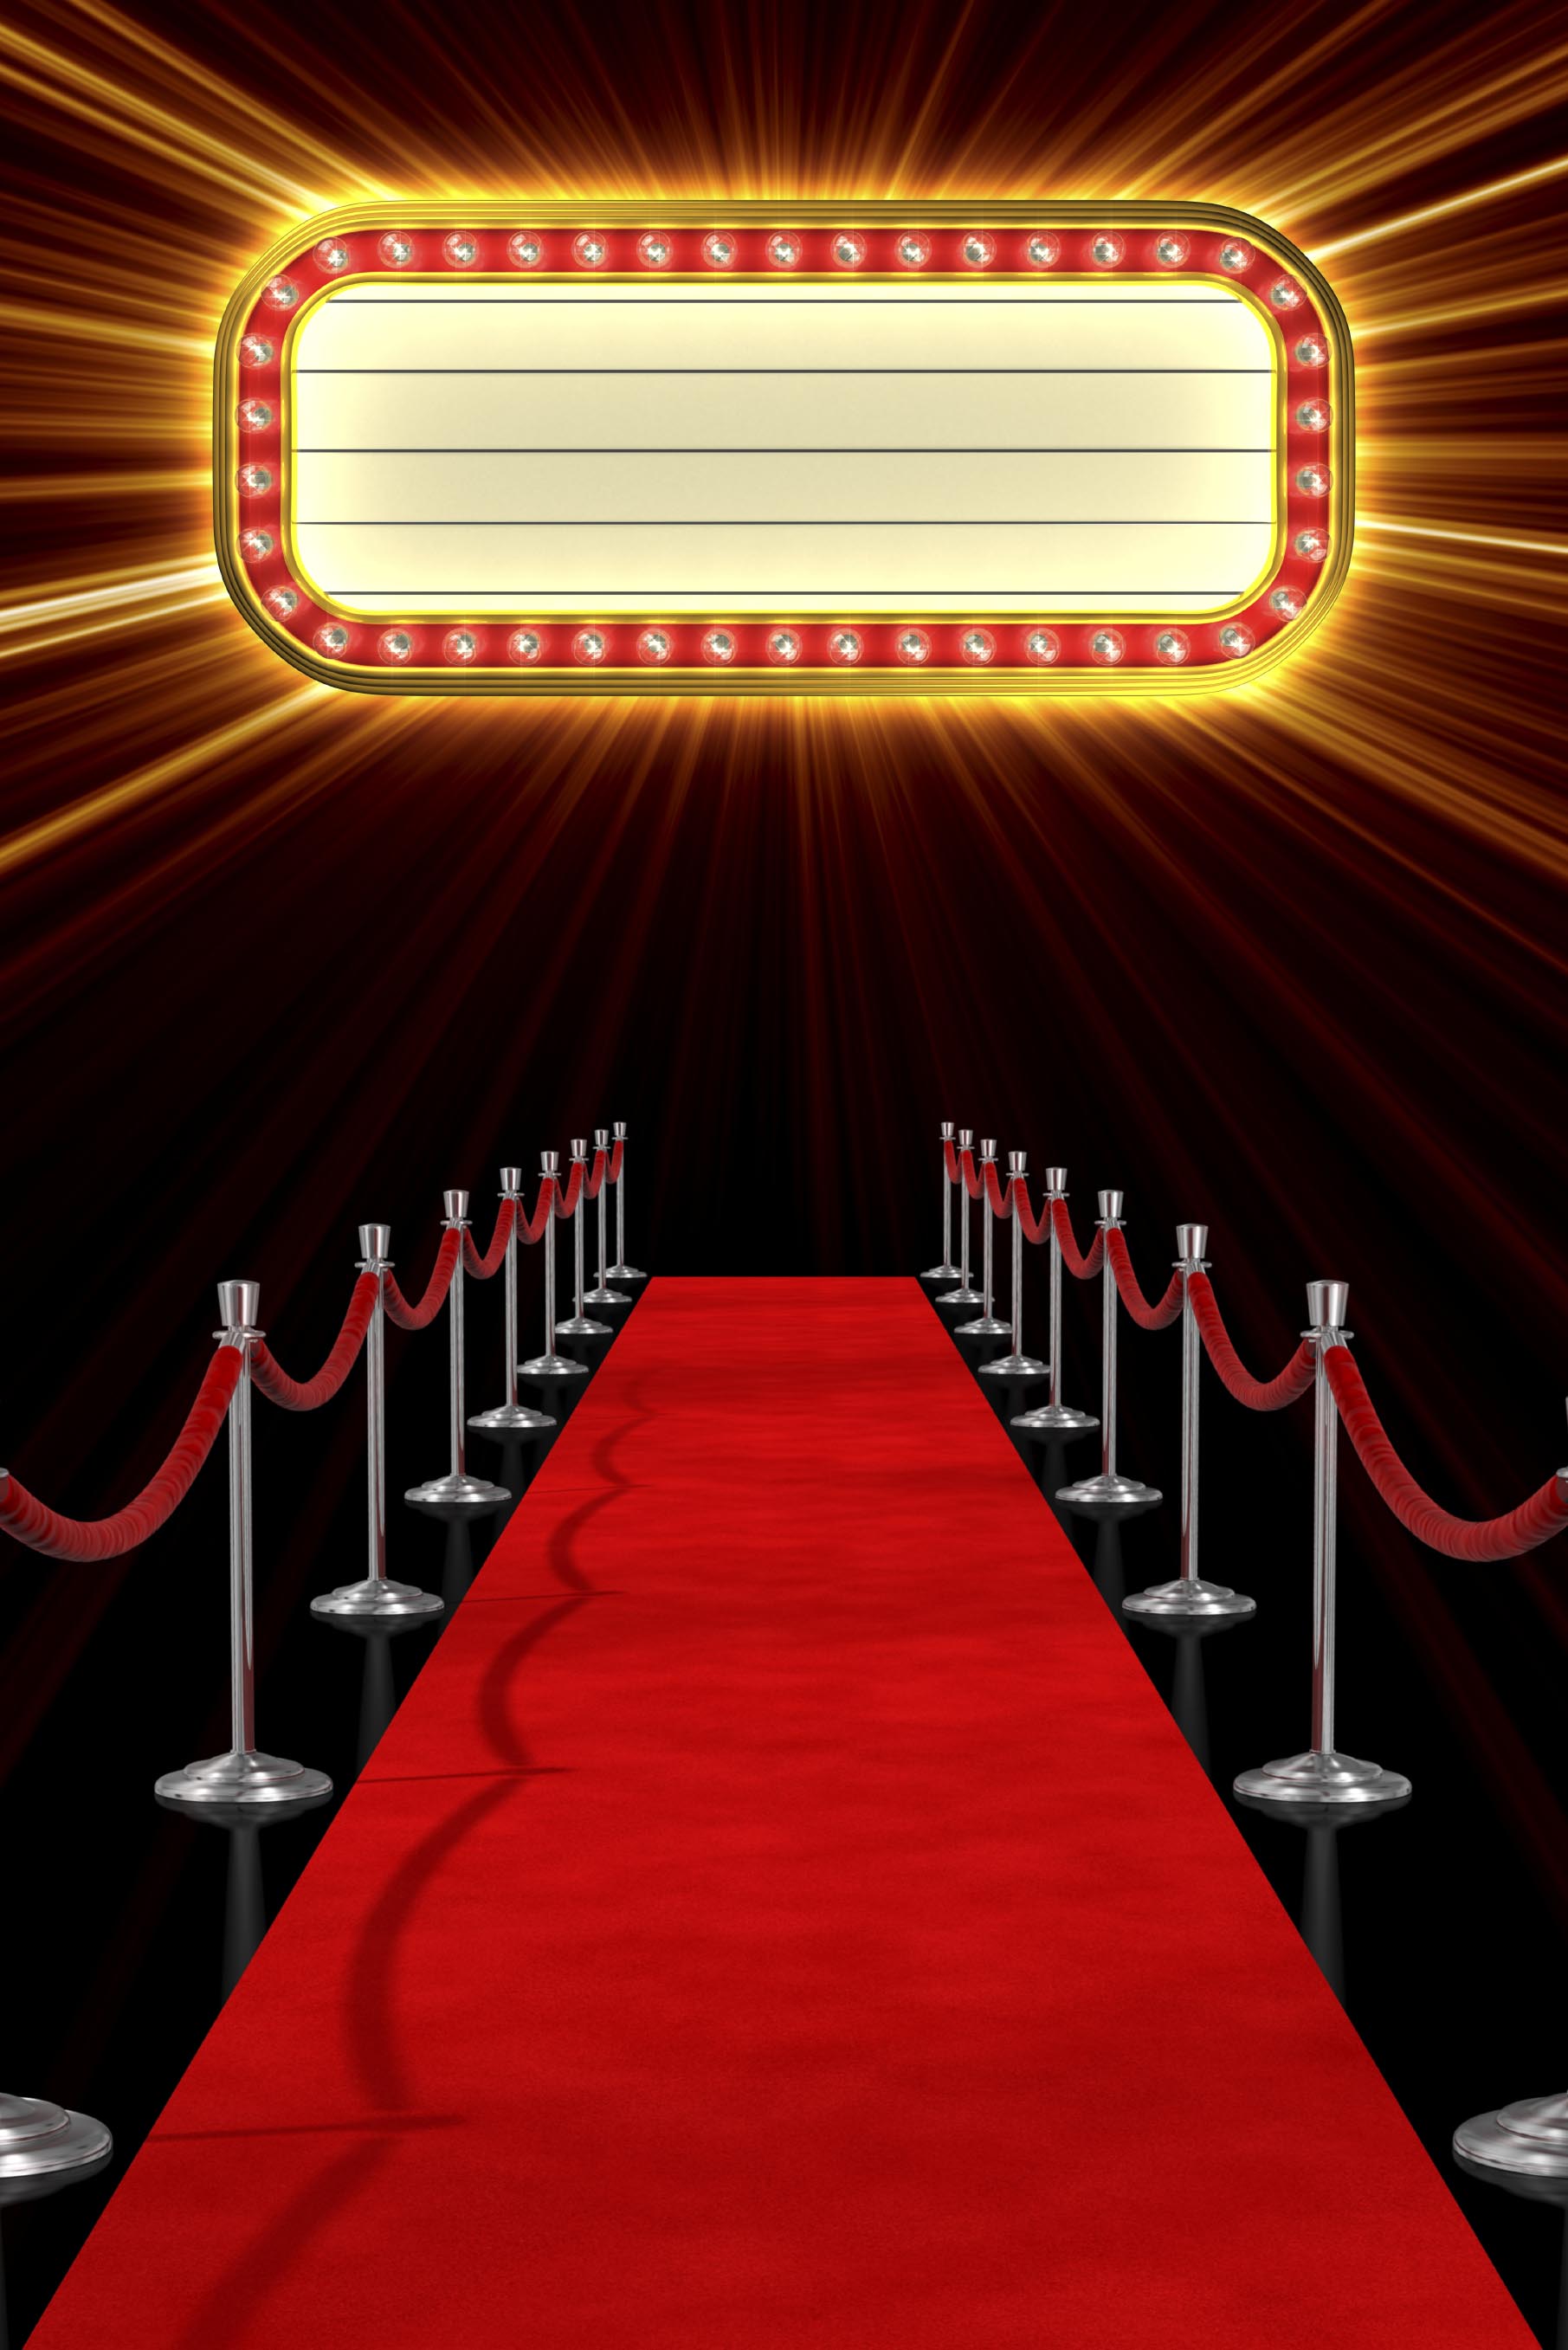 Hollywood Theme Background Image Pictures Becuo